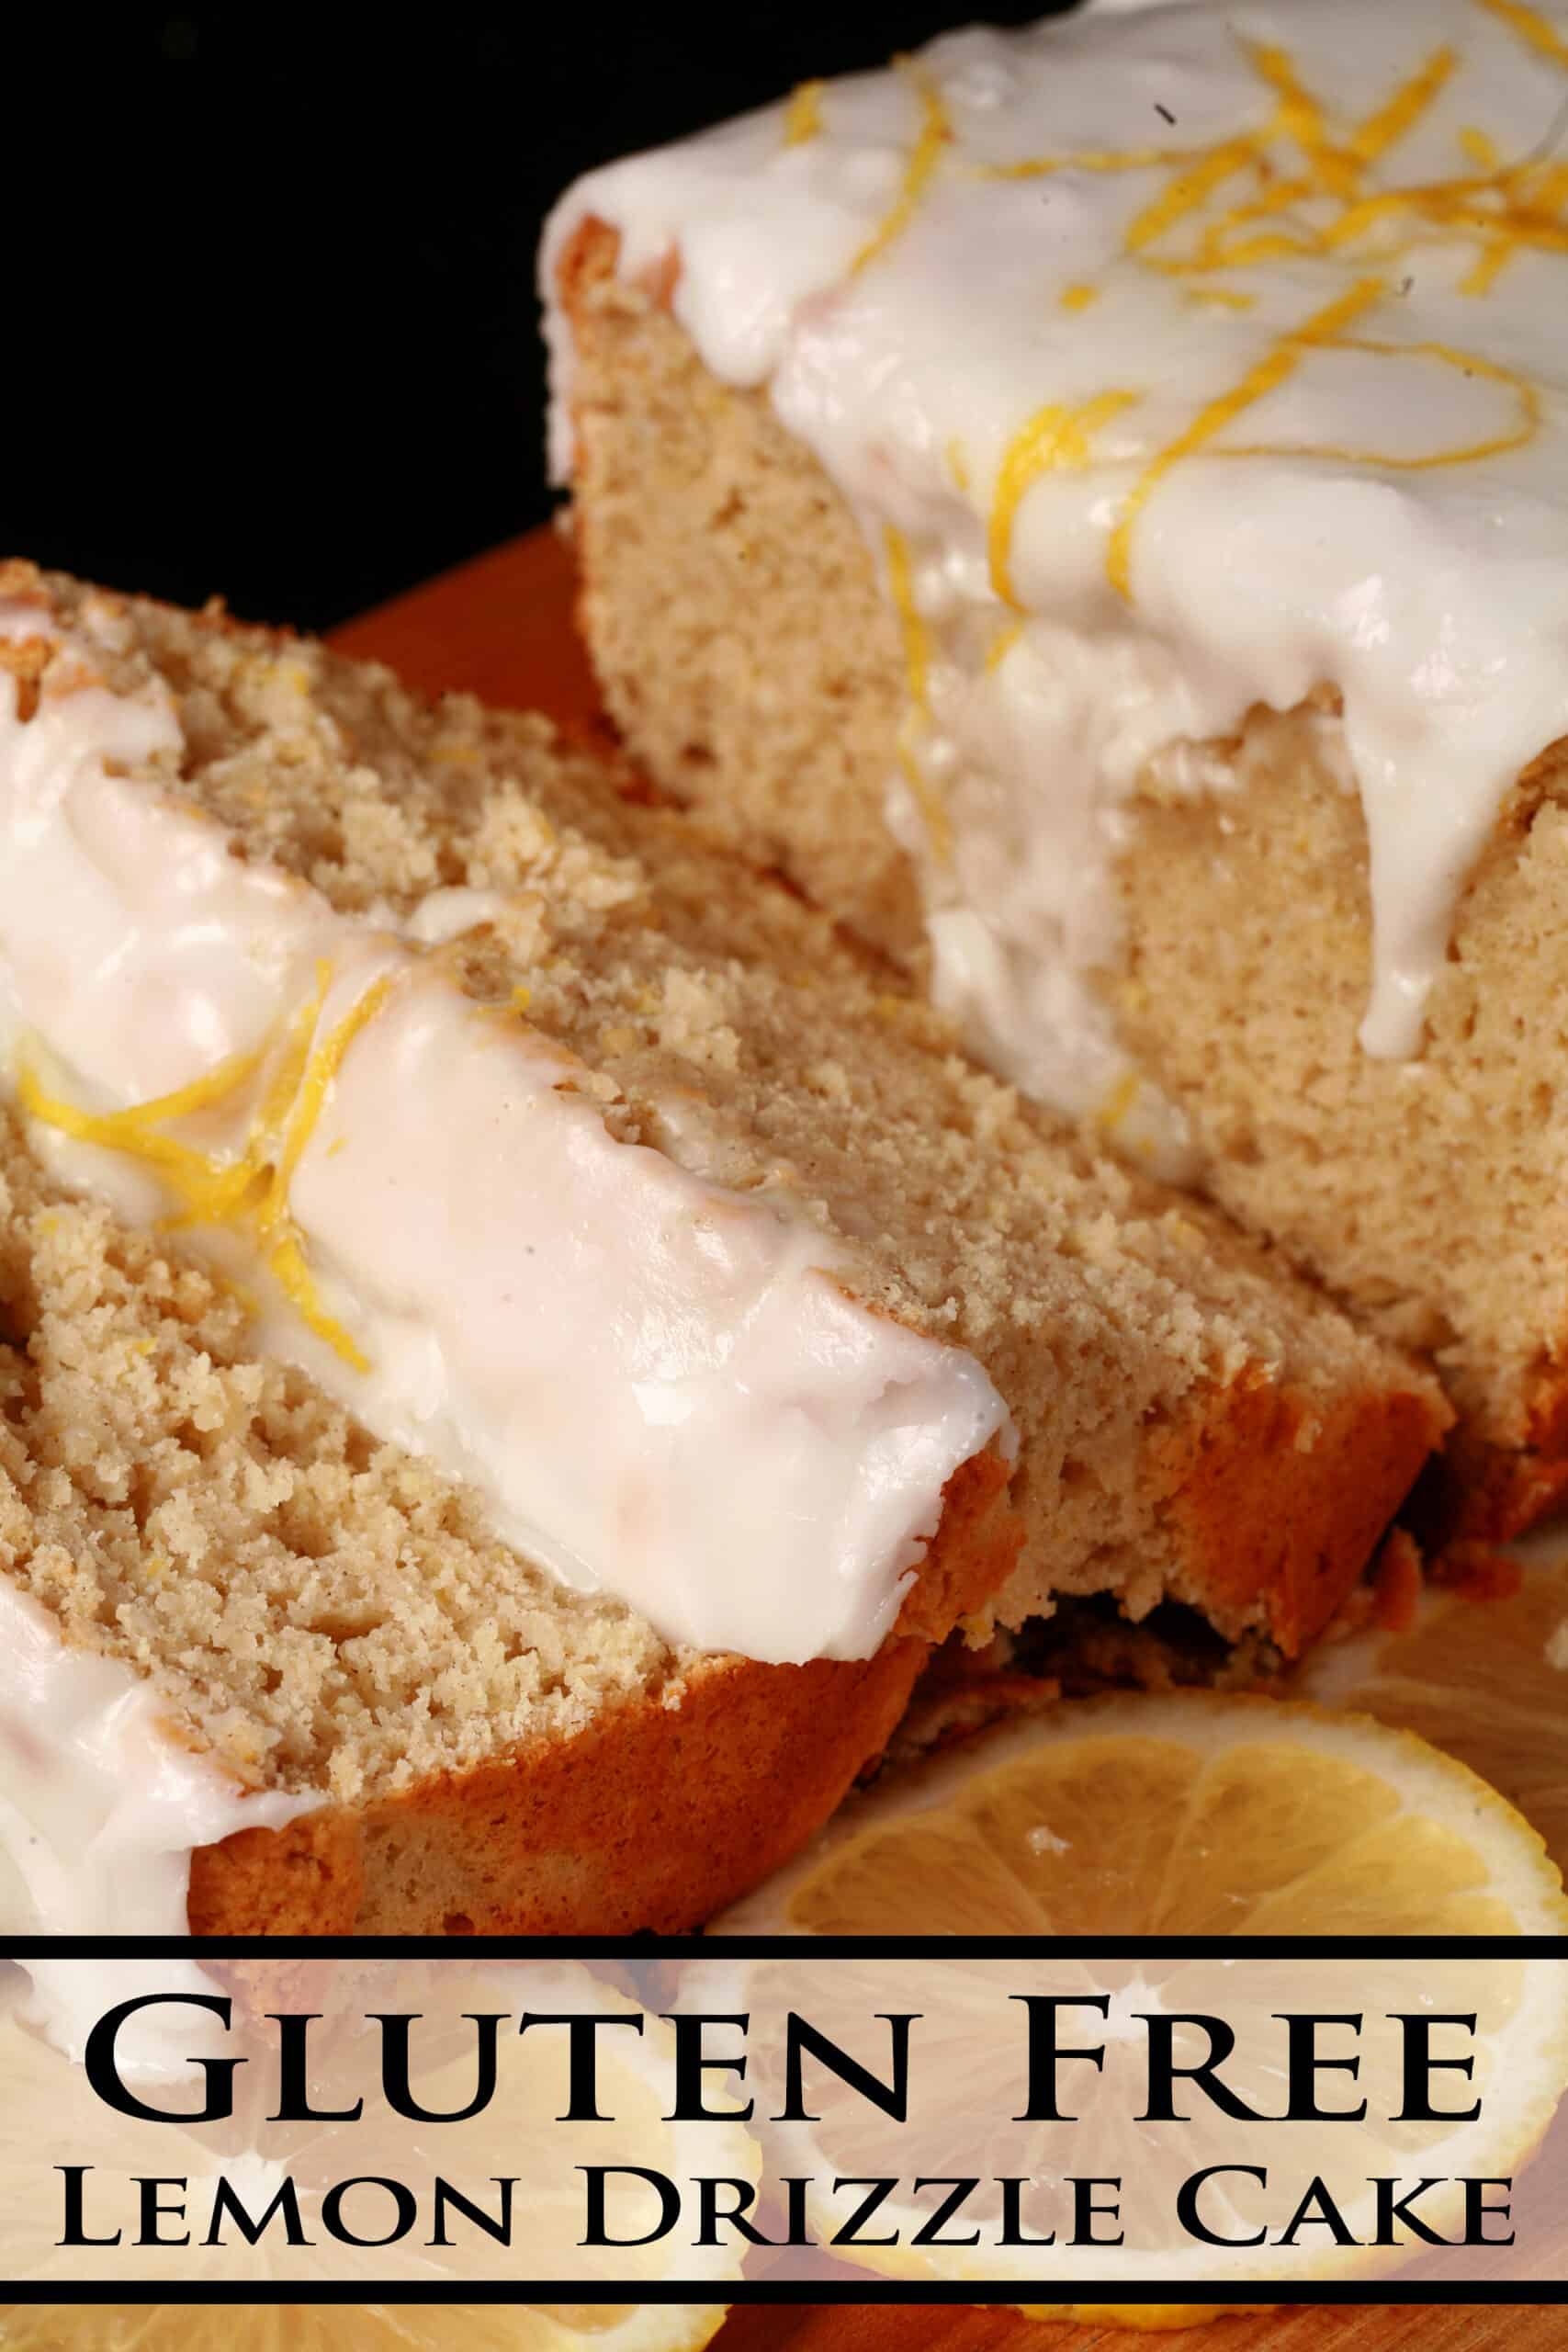 A sliced loaf of gluten-free lemon drizzle cake, with white glaze and lemon zest on top.